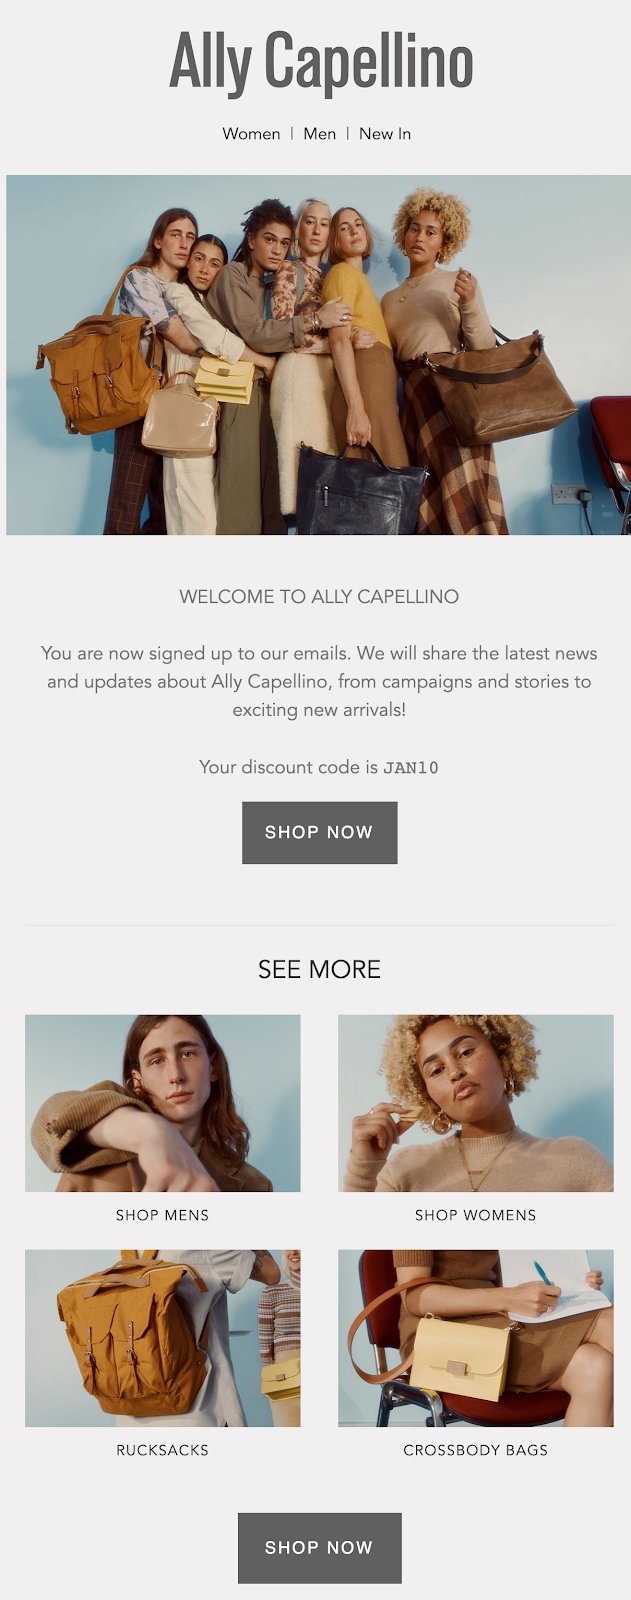 Ally Capellino welcome email